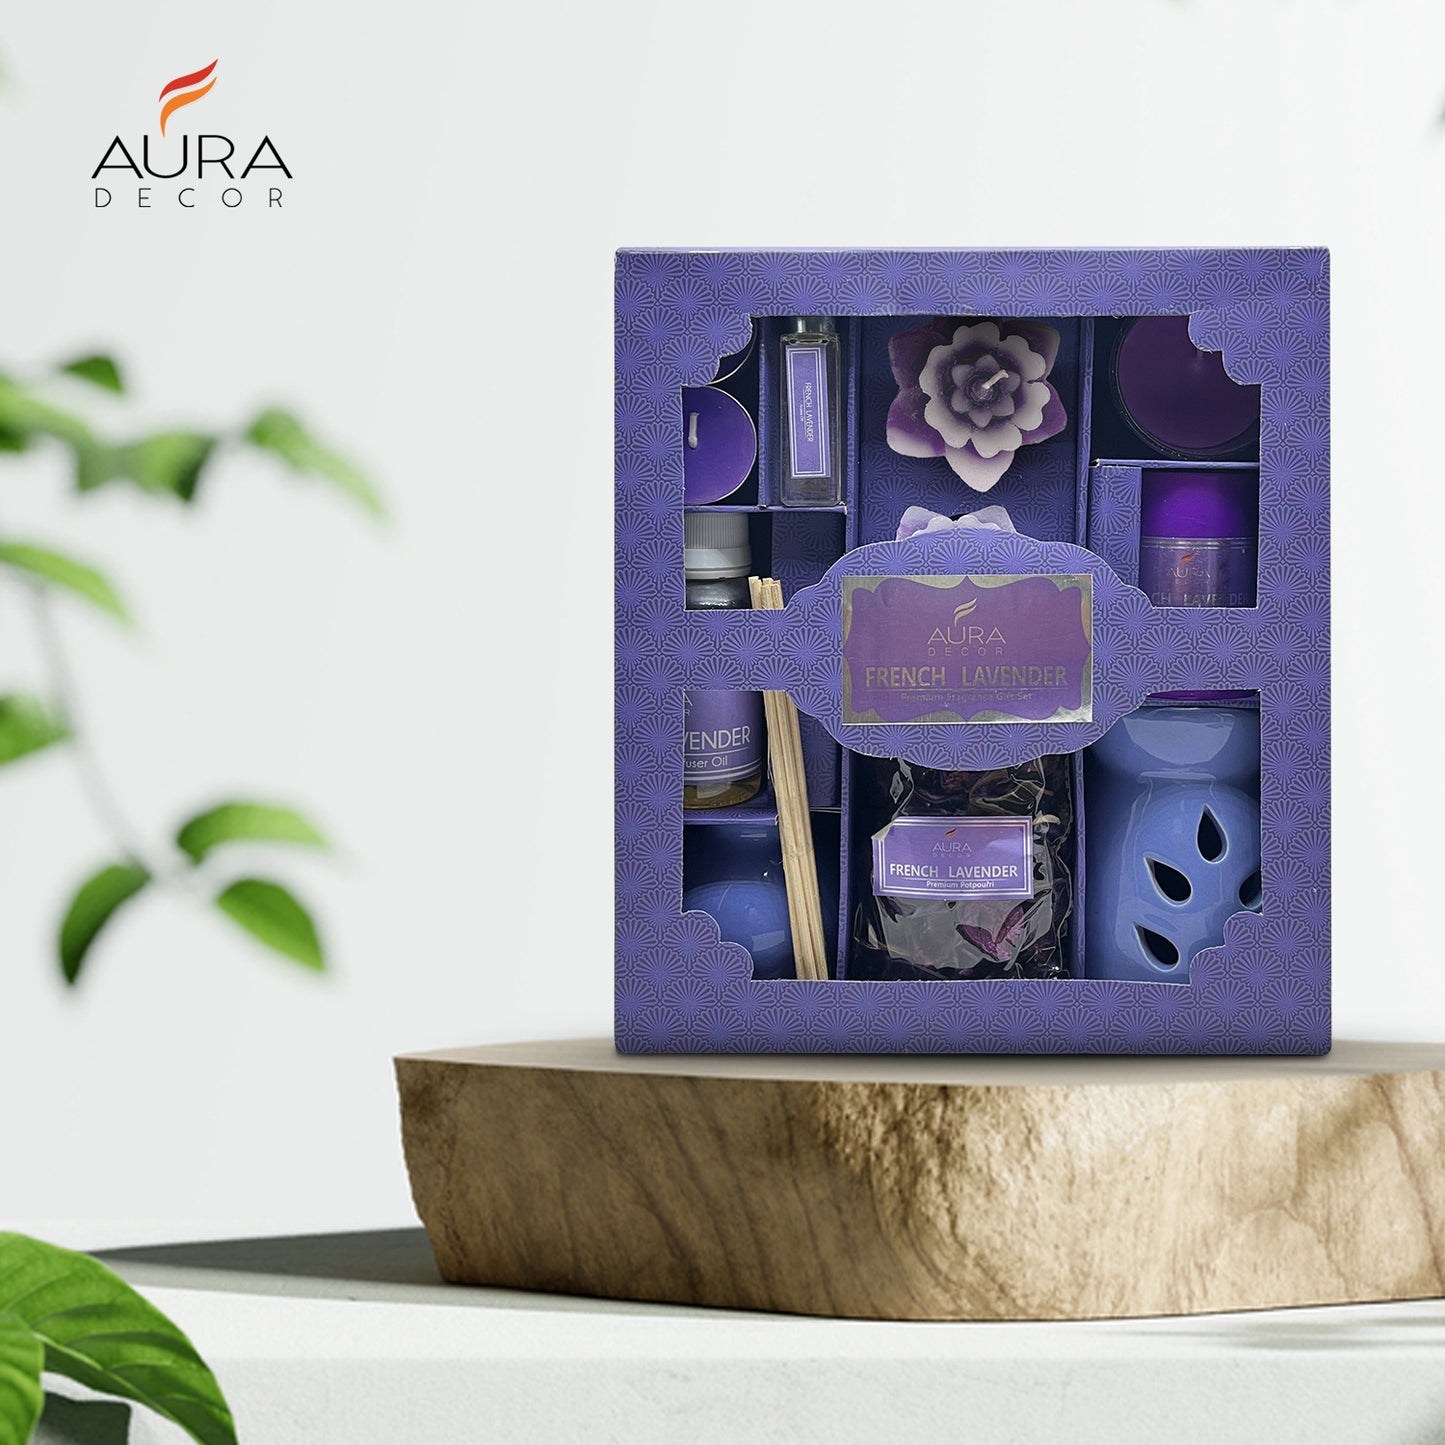 Aura Combo Gift Pack for Aromatherapy, Corporate Gifting Fragrance Lavender